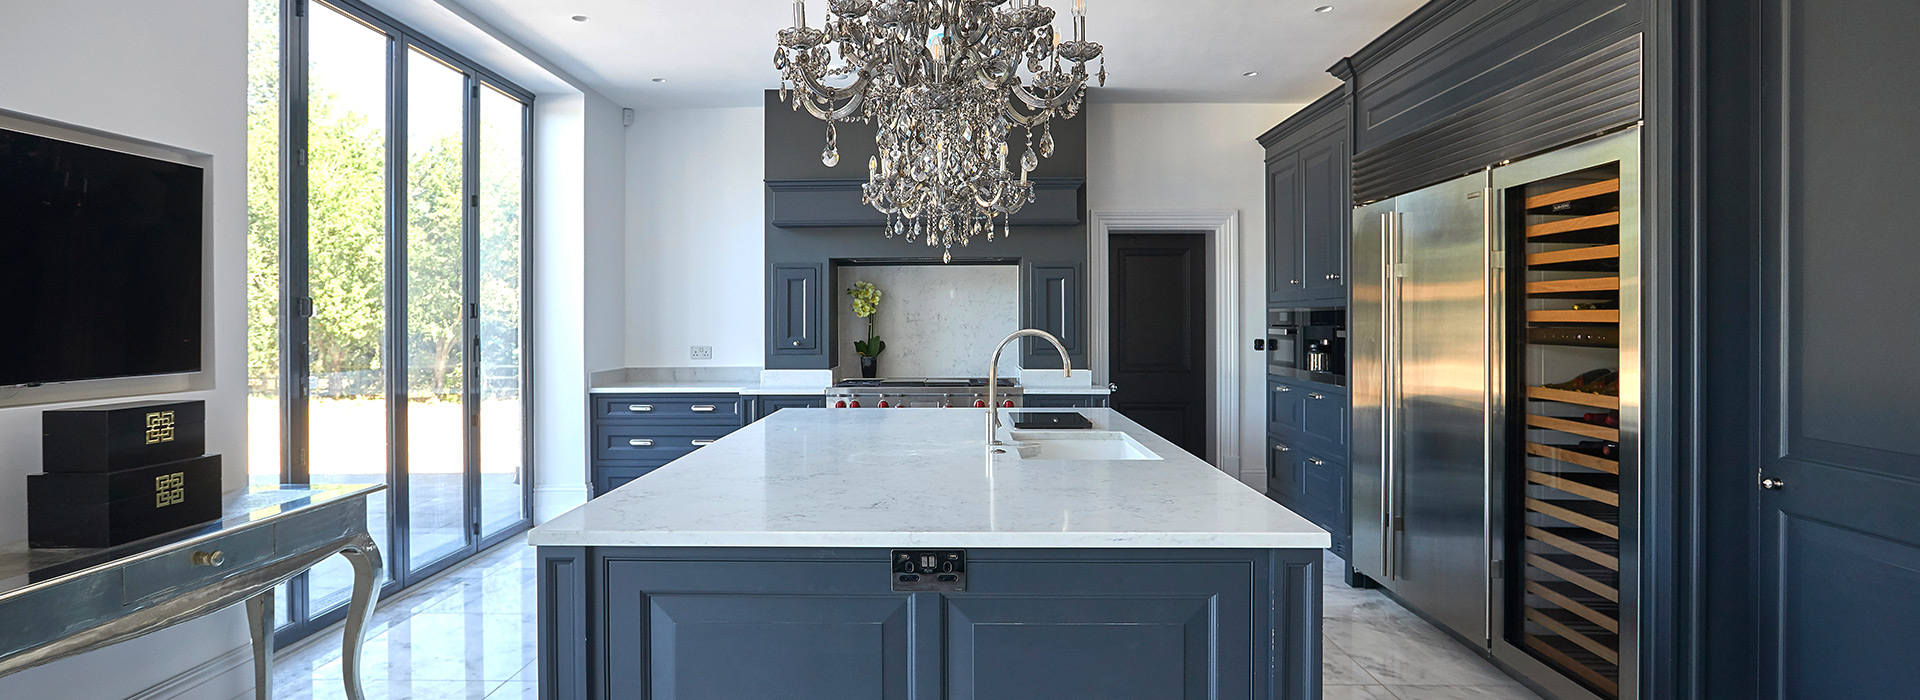 Marble kitchen with chandelier